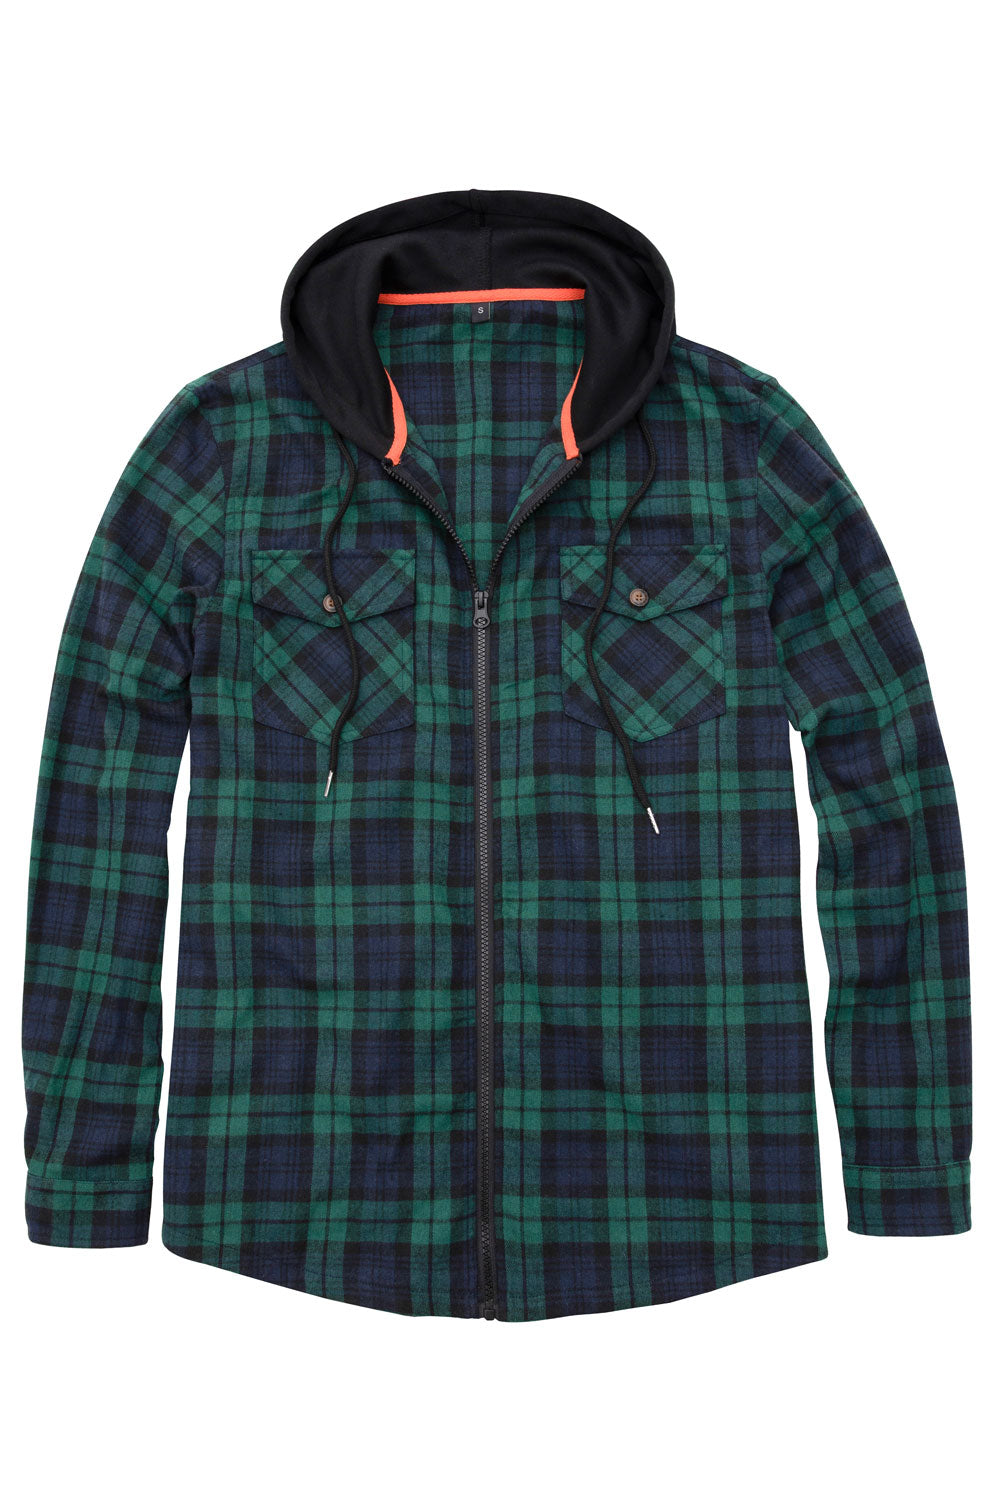 Men's Full Zip Up Hoodie Plaid Flannel Shirt Jacket with Hand Pockets